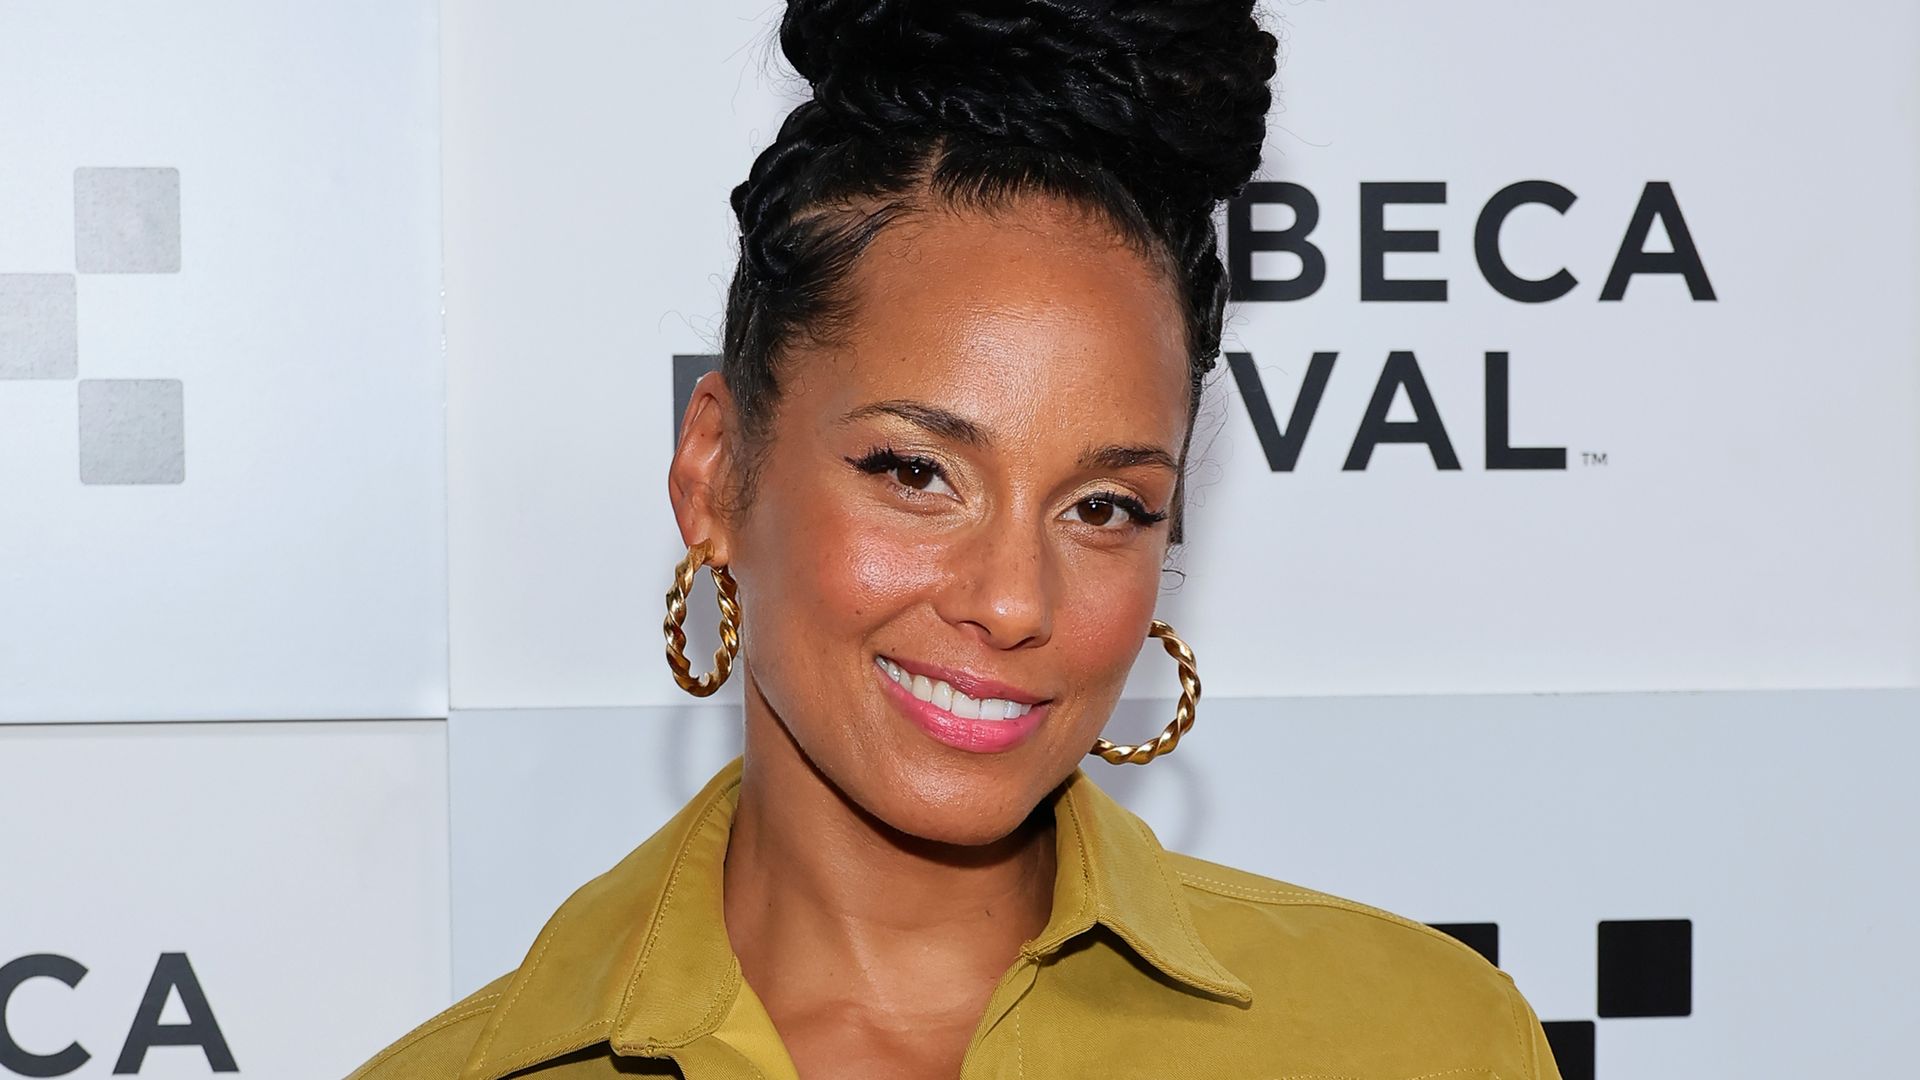 Alicia Keys smiling at a red carpet photocall